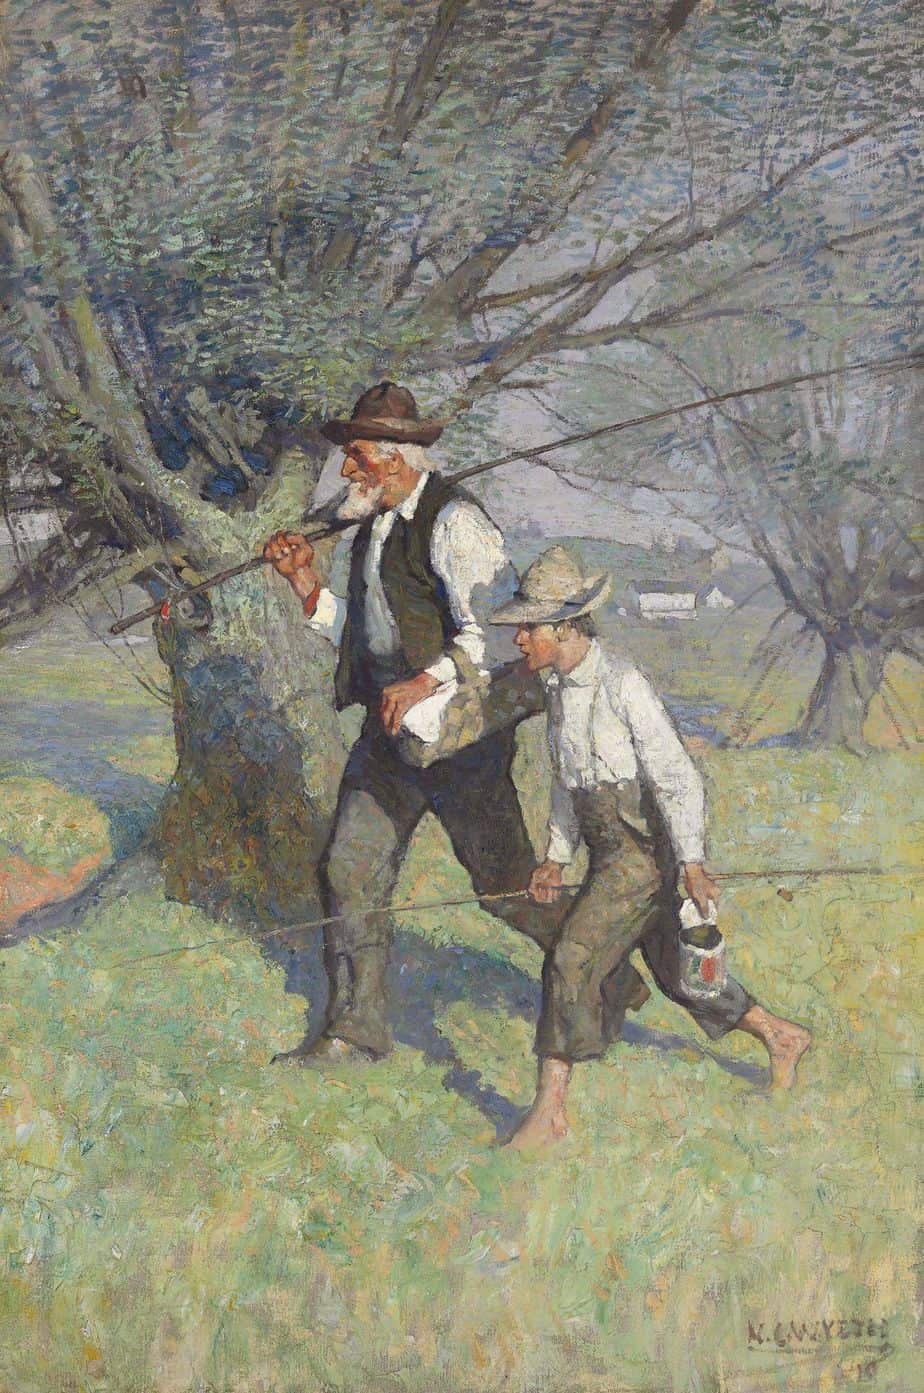  N. C. Wyeth (1882-1945) The Call of Spring 